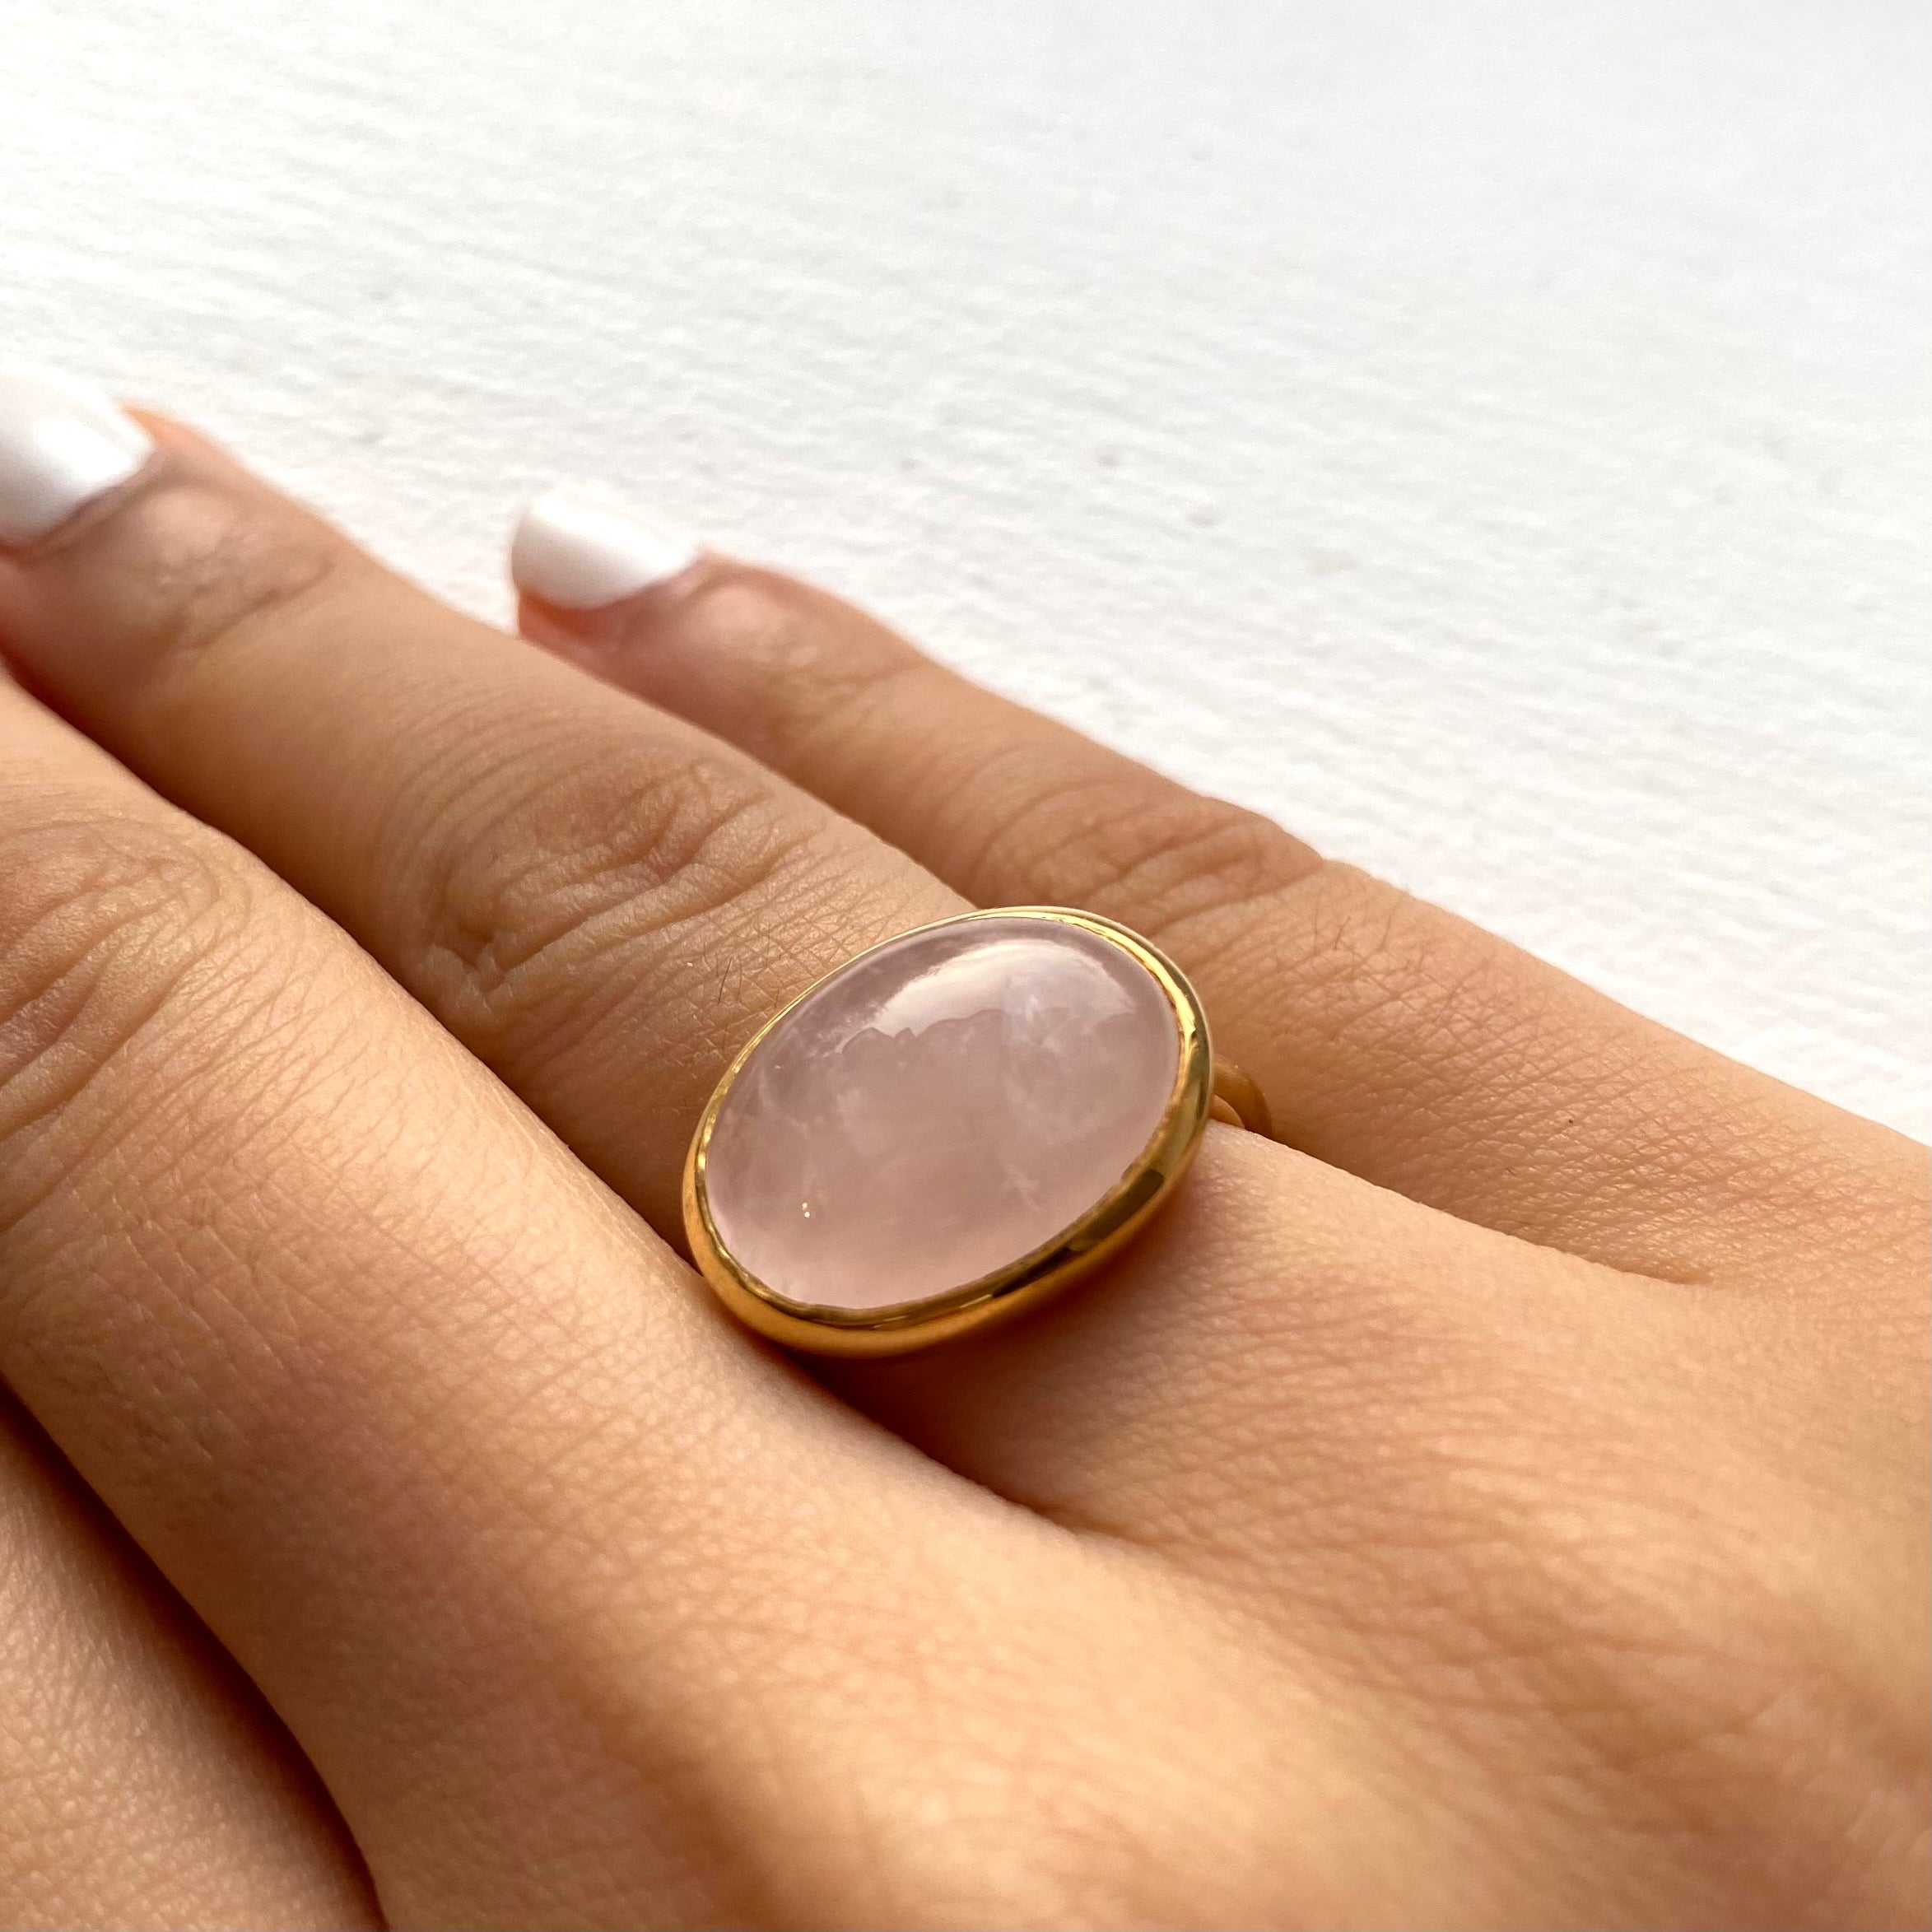 Cabochon Oval Cut Natural Gemstone Gold Plated Sterling Silver Ring - Rose Quartz